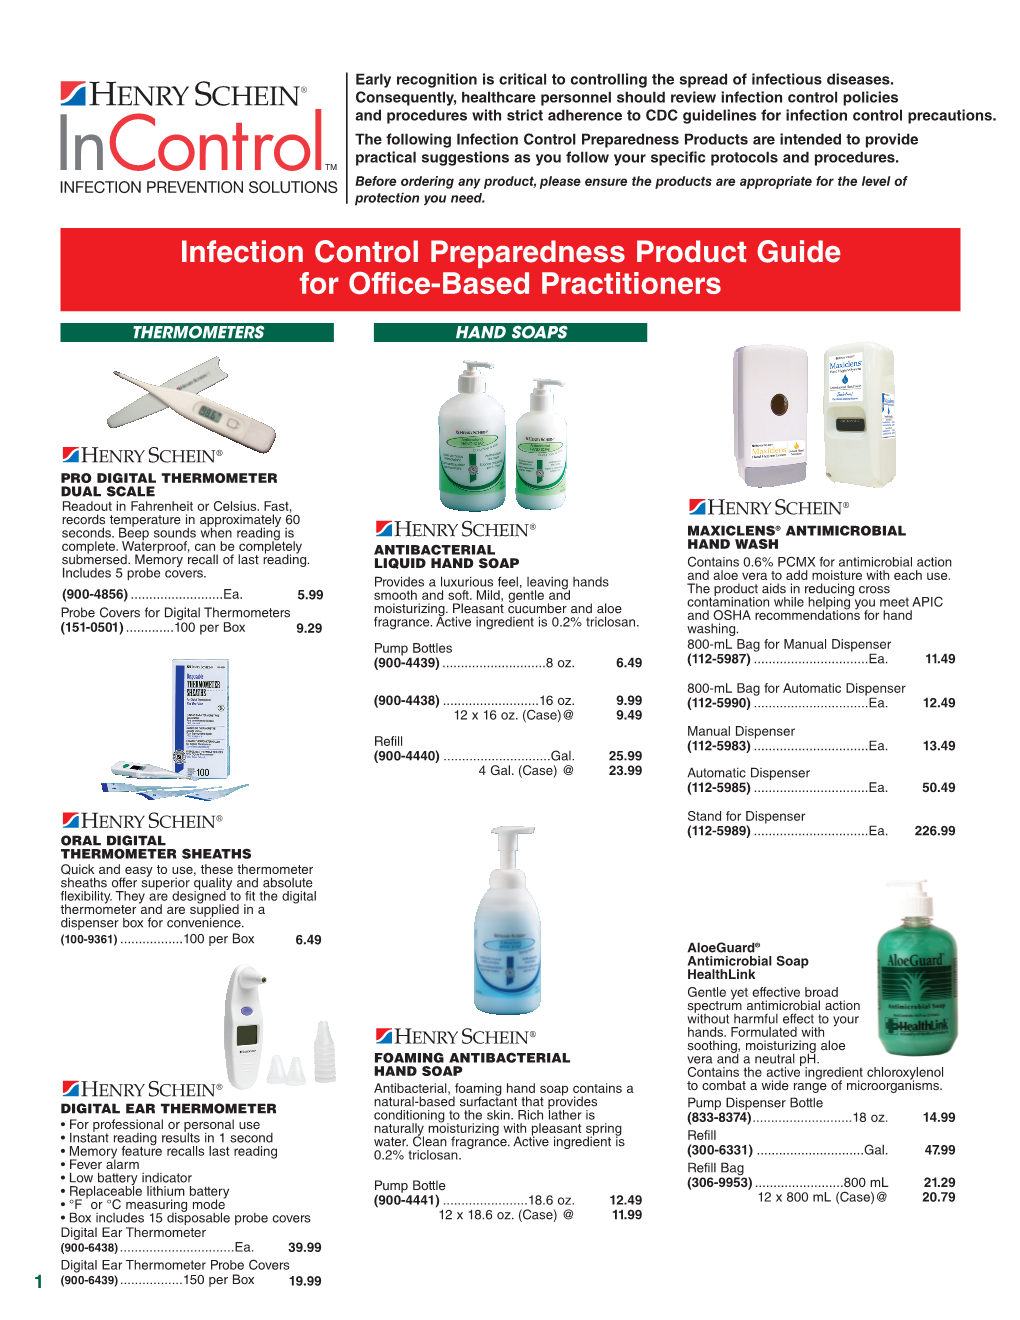 Infection Control Preparedness Product Guide for Office-Based Practitioners